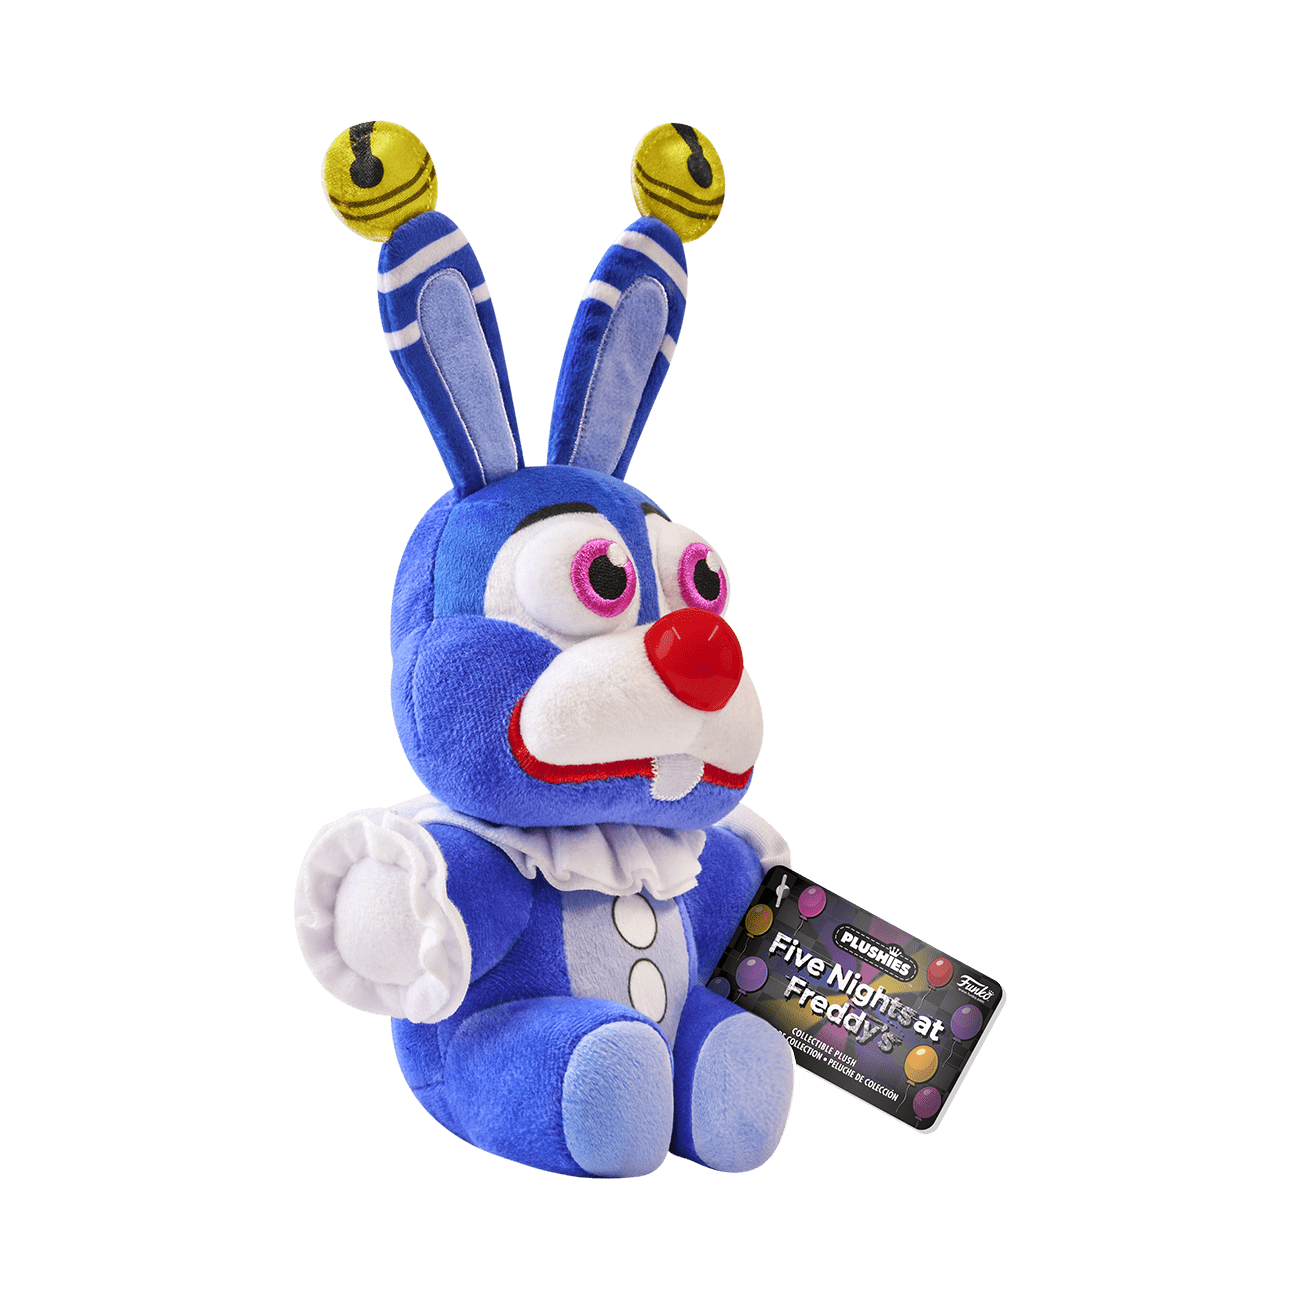 uiuoutoy FNAF Peluche Five Nights At Freddys Pelshies Toys Circus B